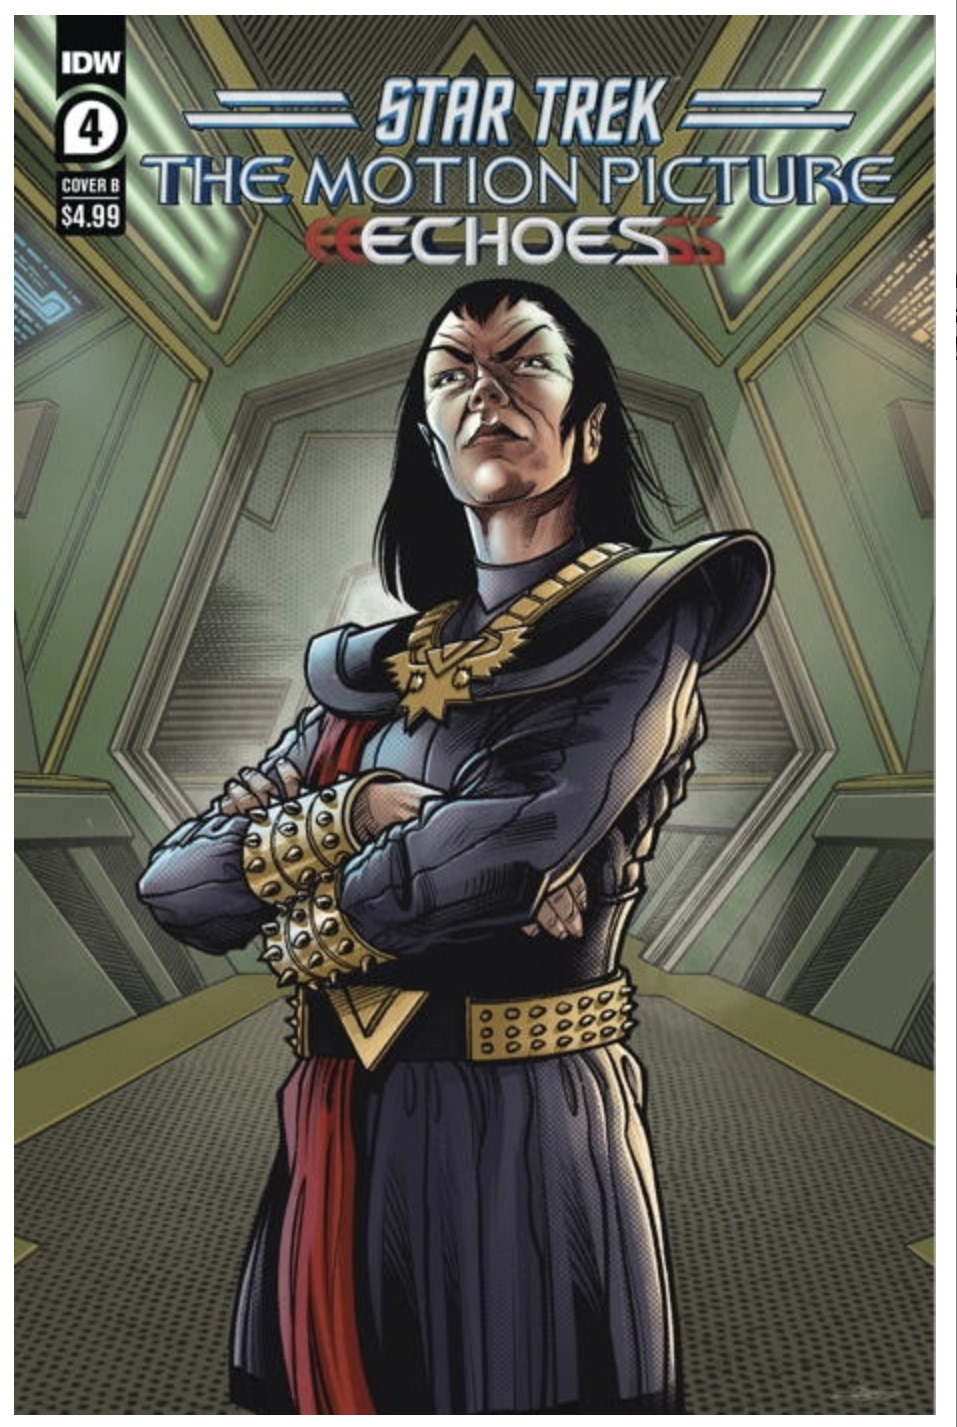 IDW Star Trek: The Motion Picture - Echoes 4B